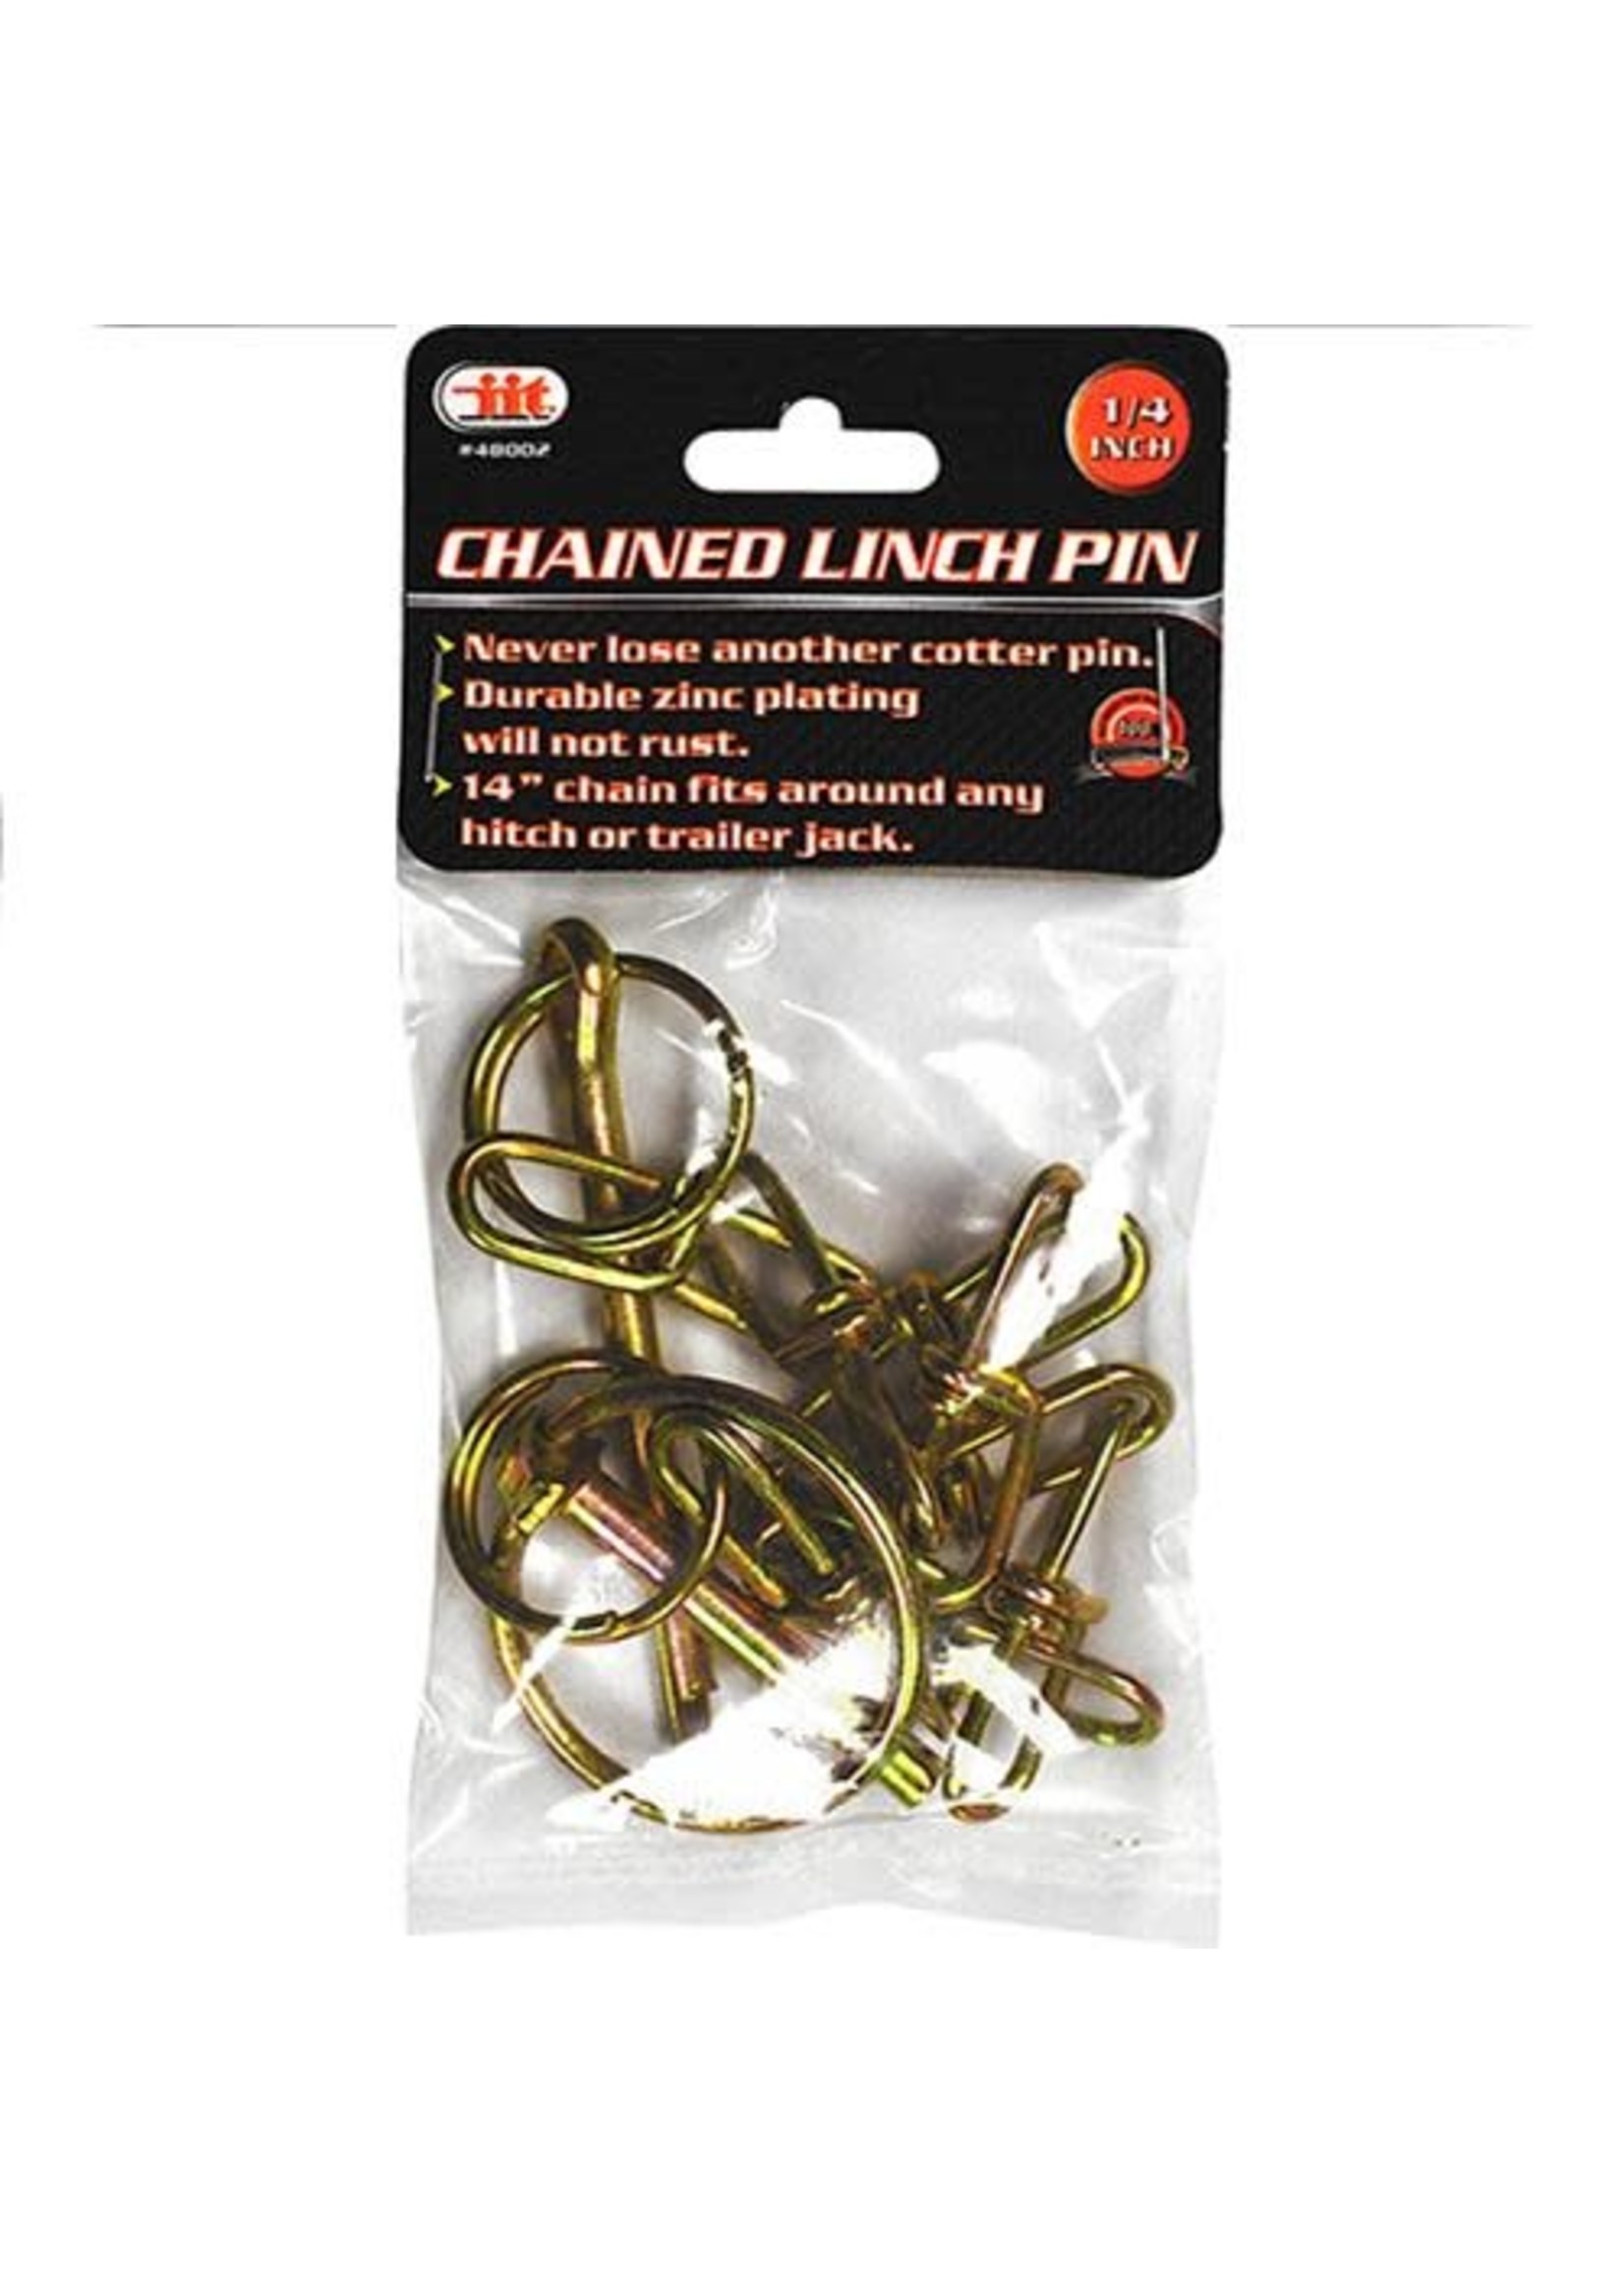 IIT 1/4" Chained Lynch Pin